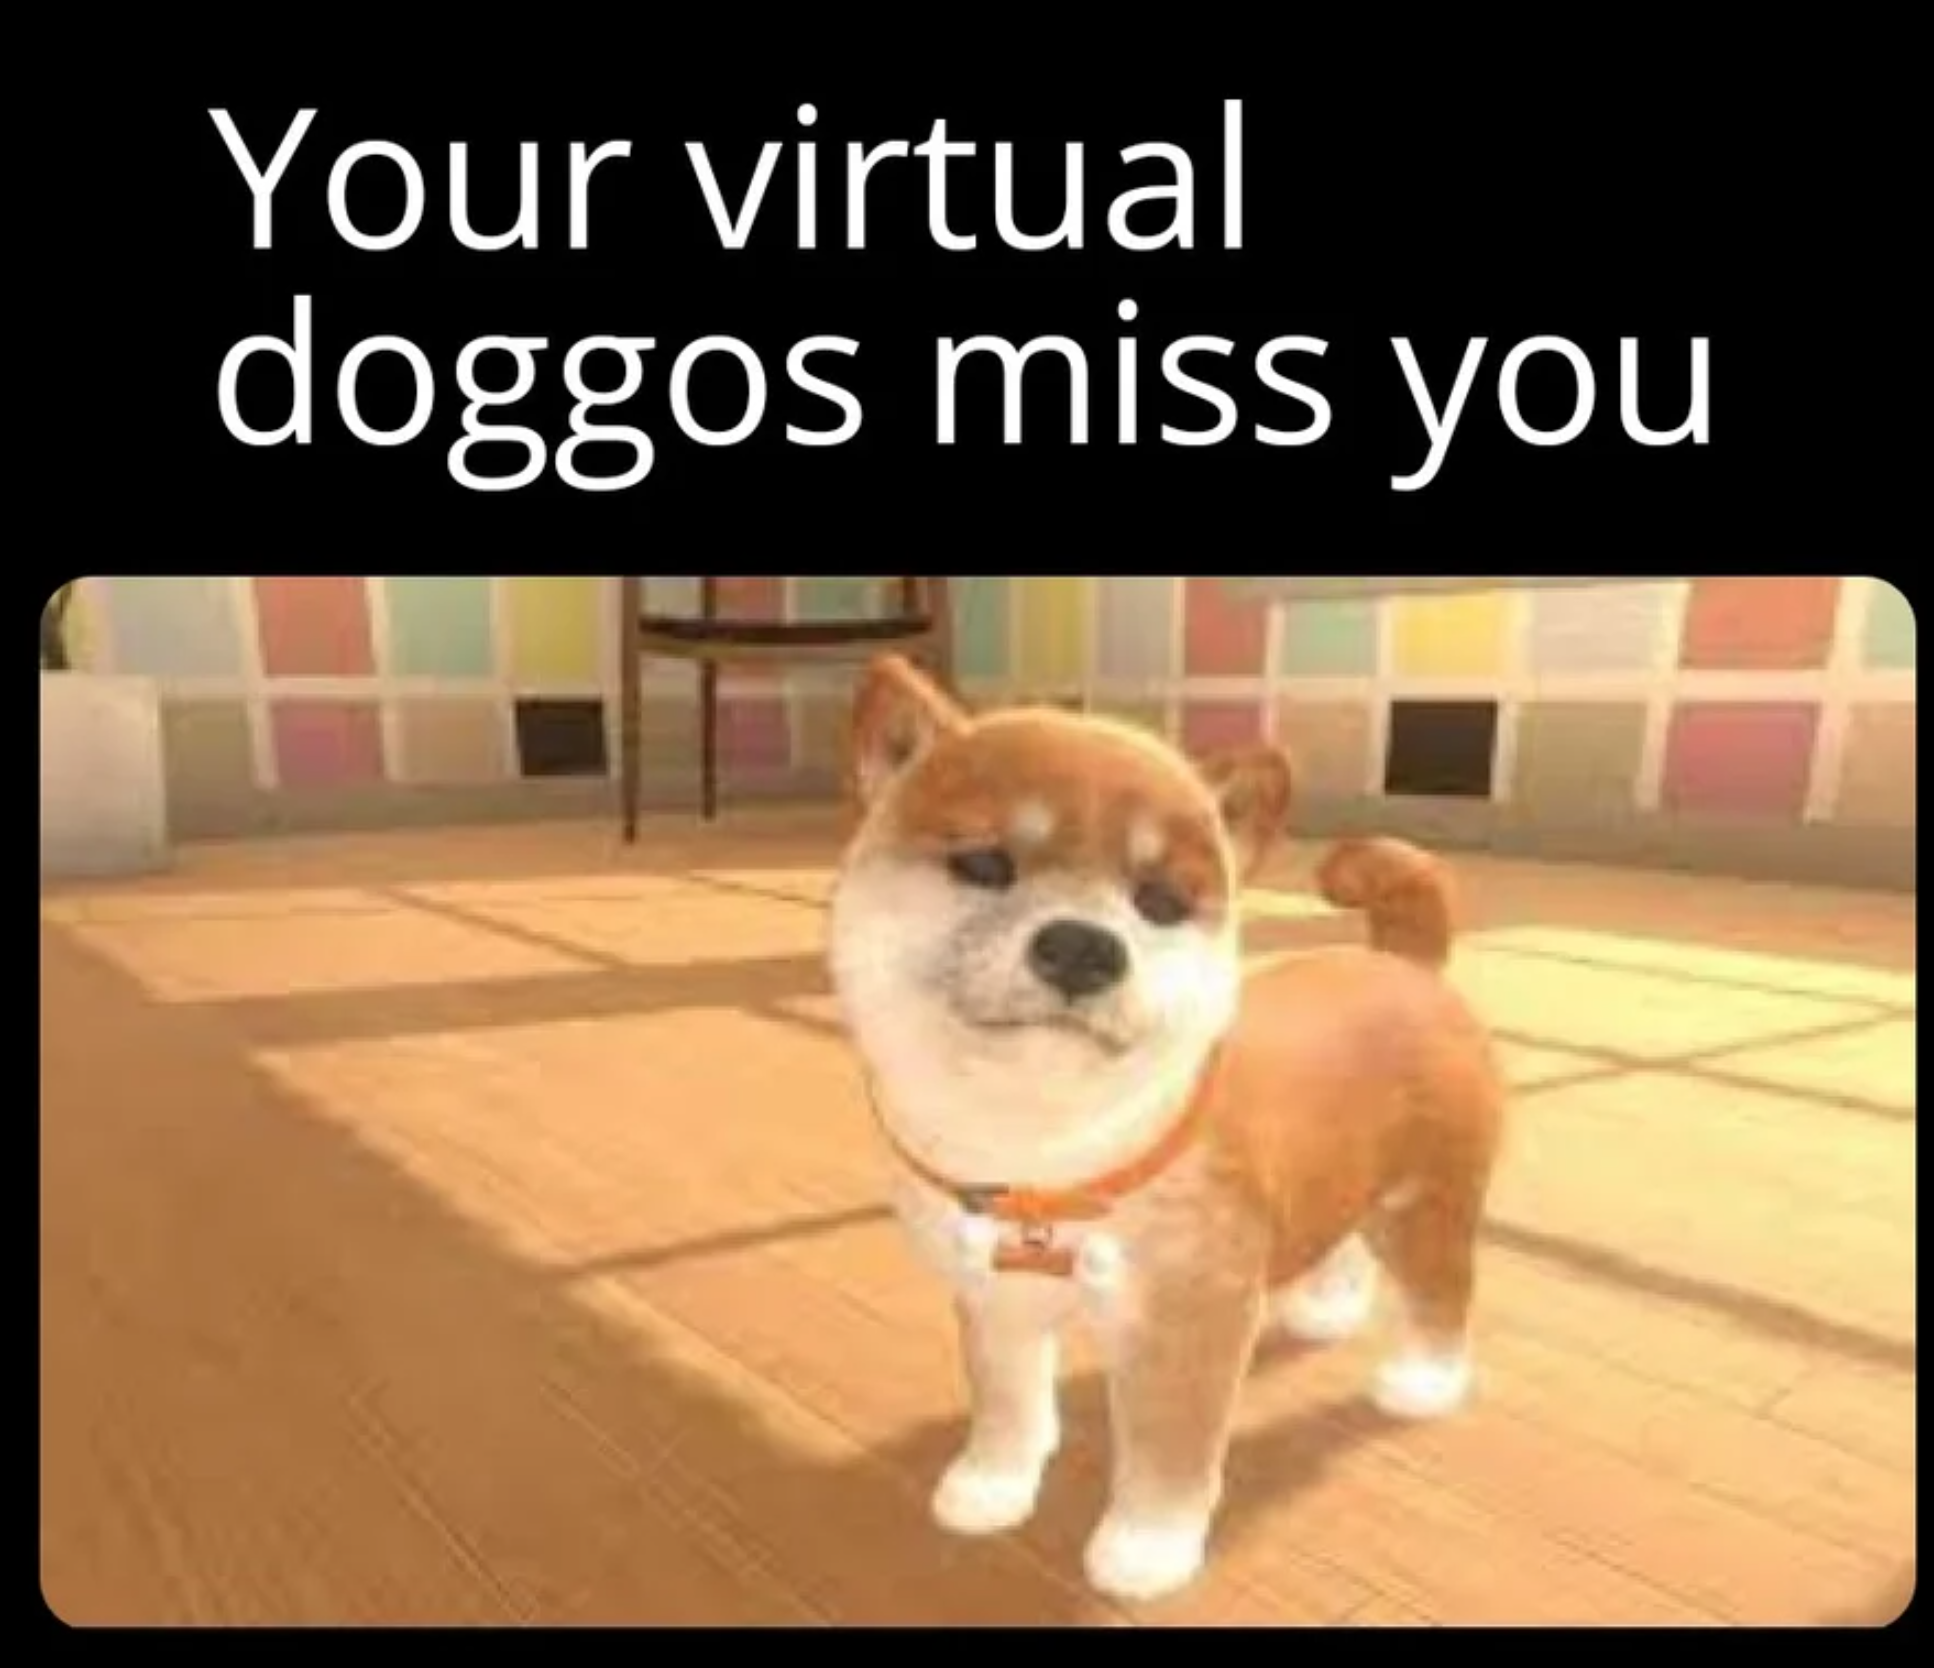 funny gaming memes and pics - dog - Your virtual doggos miss you